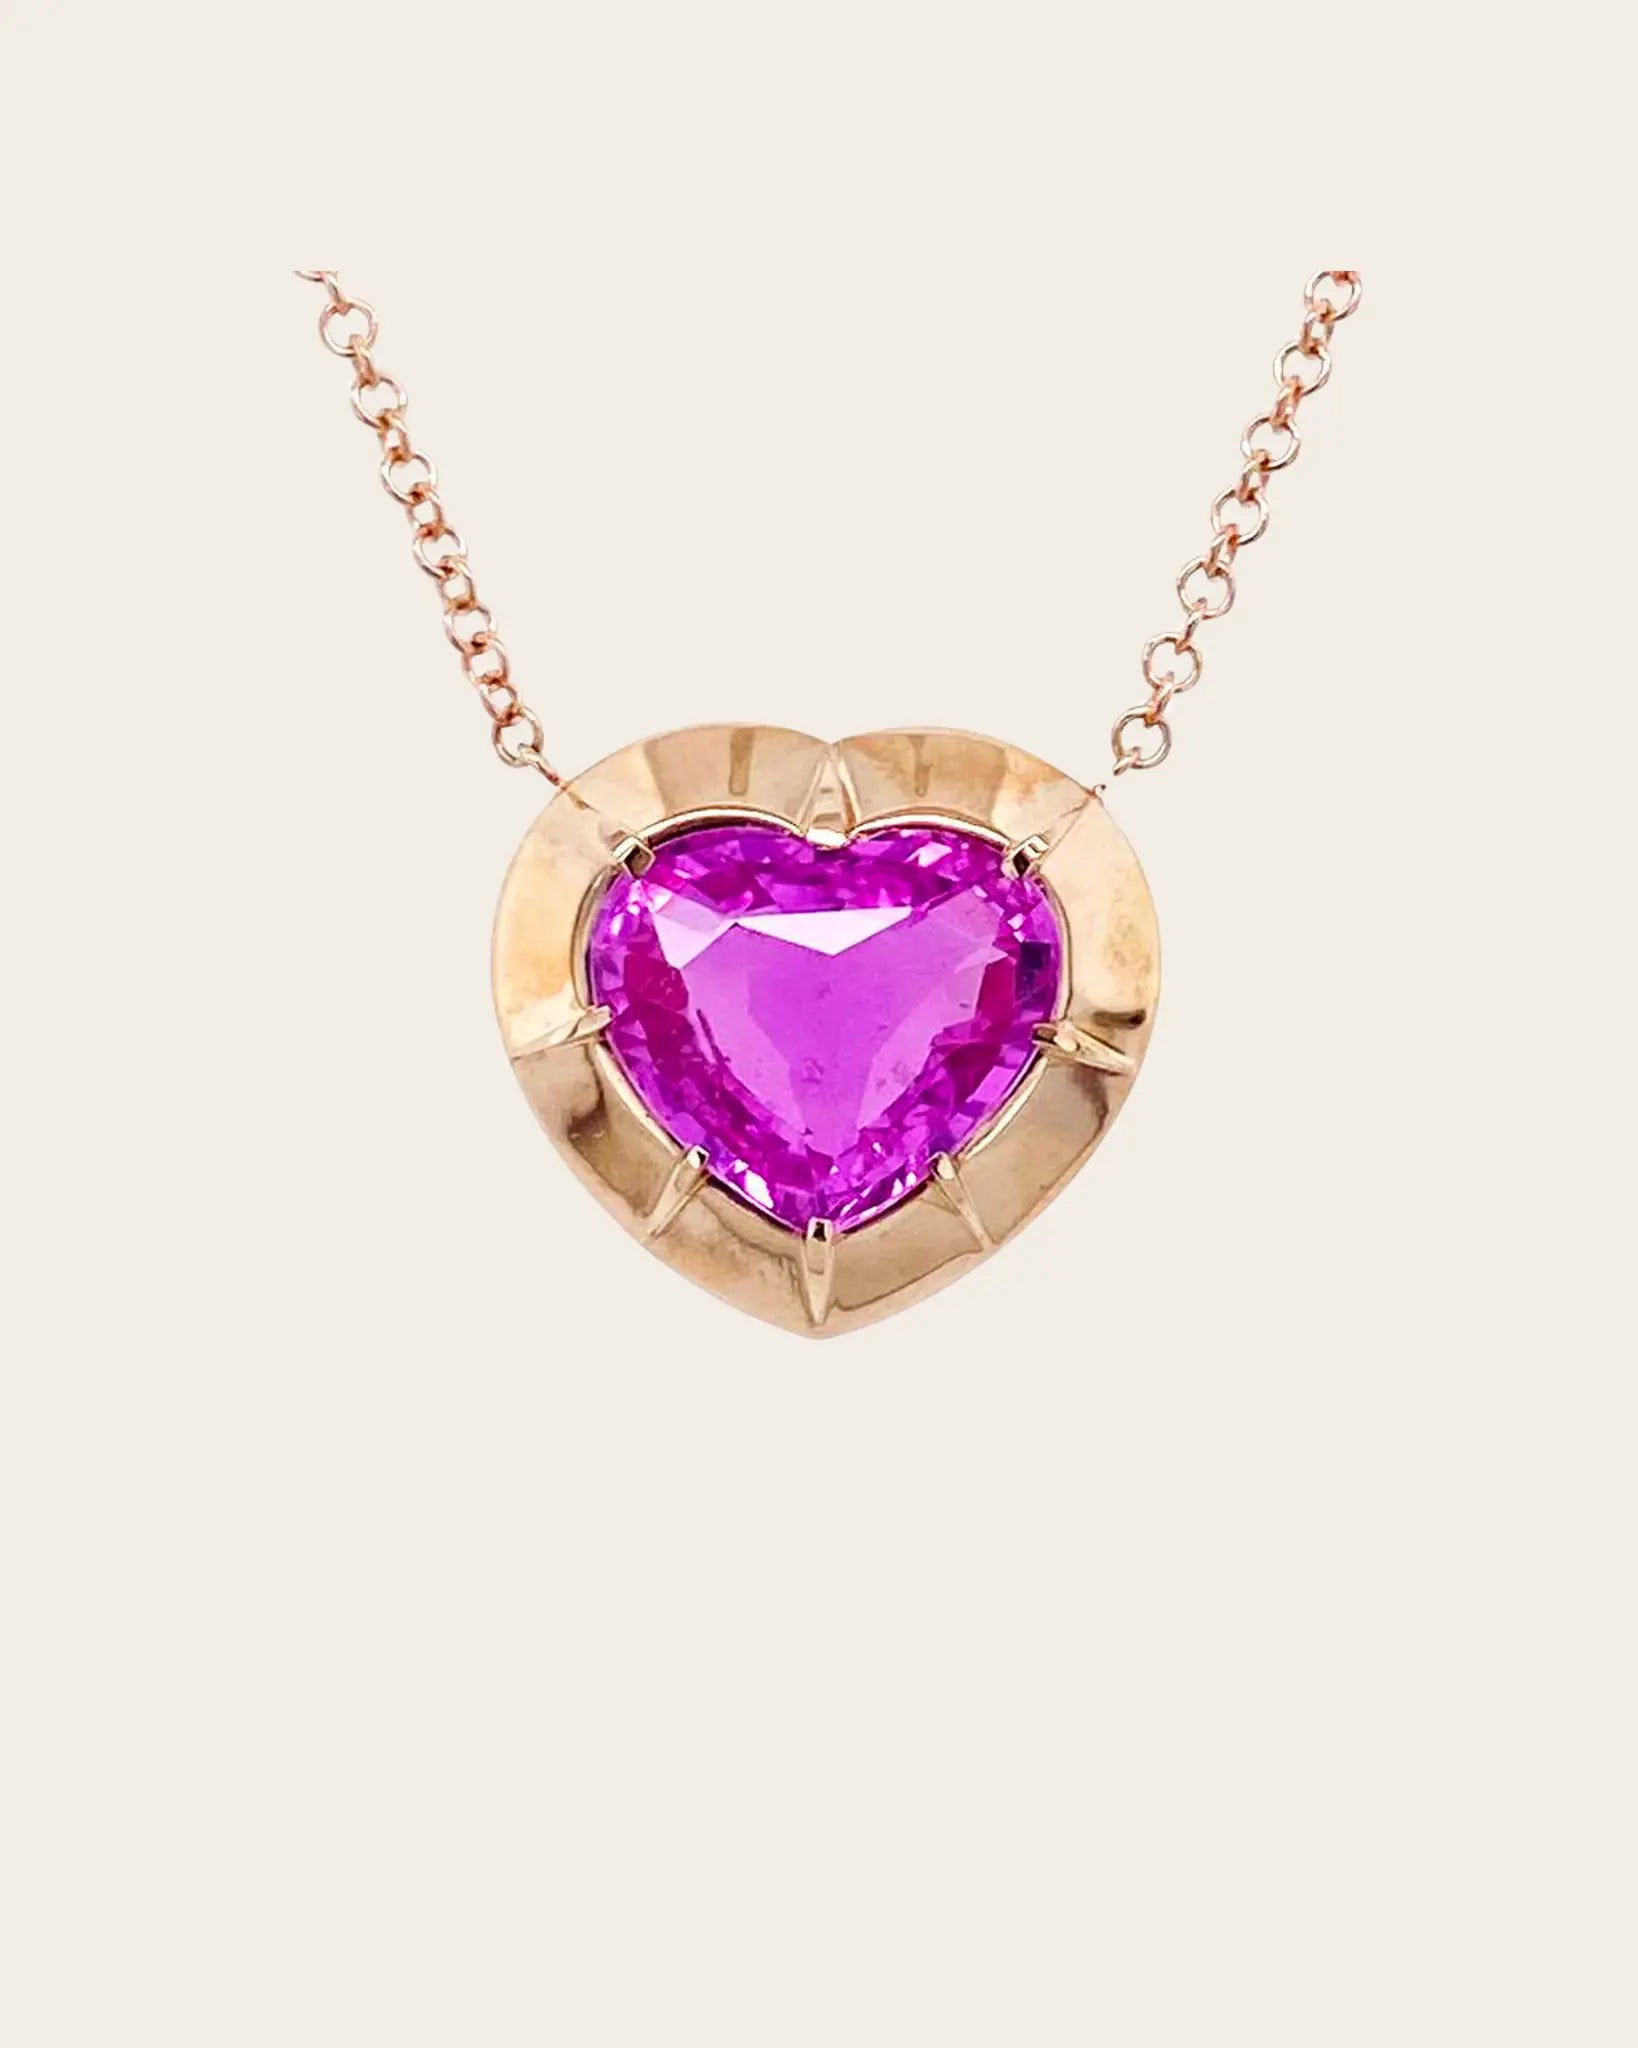 A Bayco rose gold heart pendant with a pink sapphire